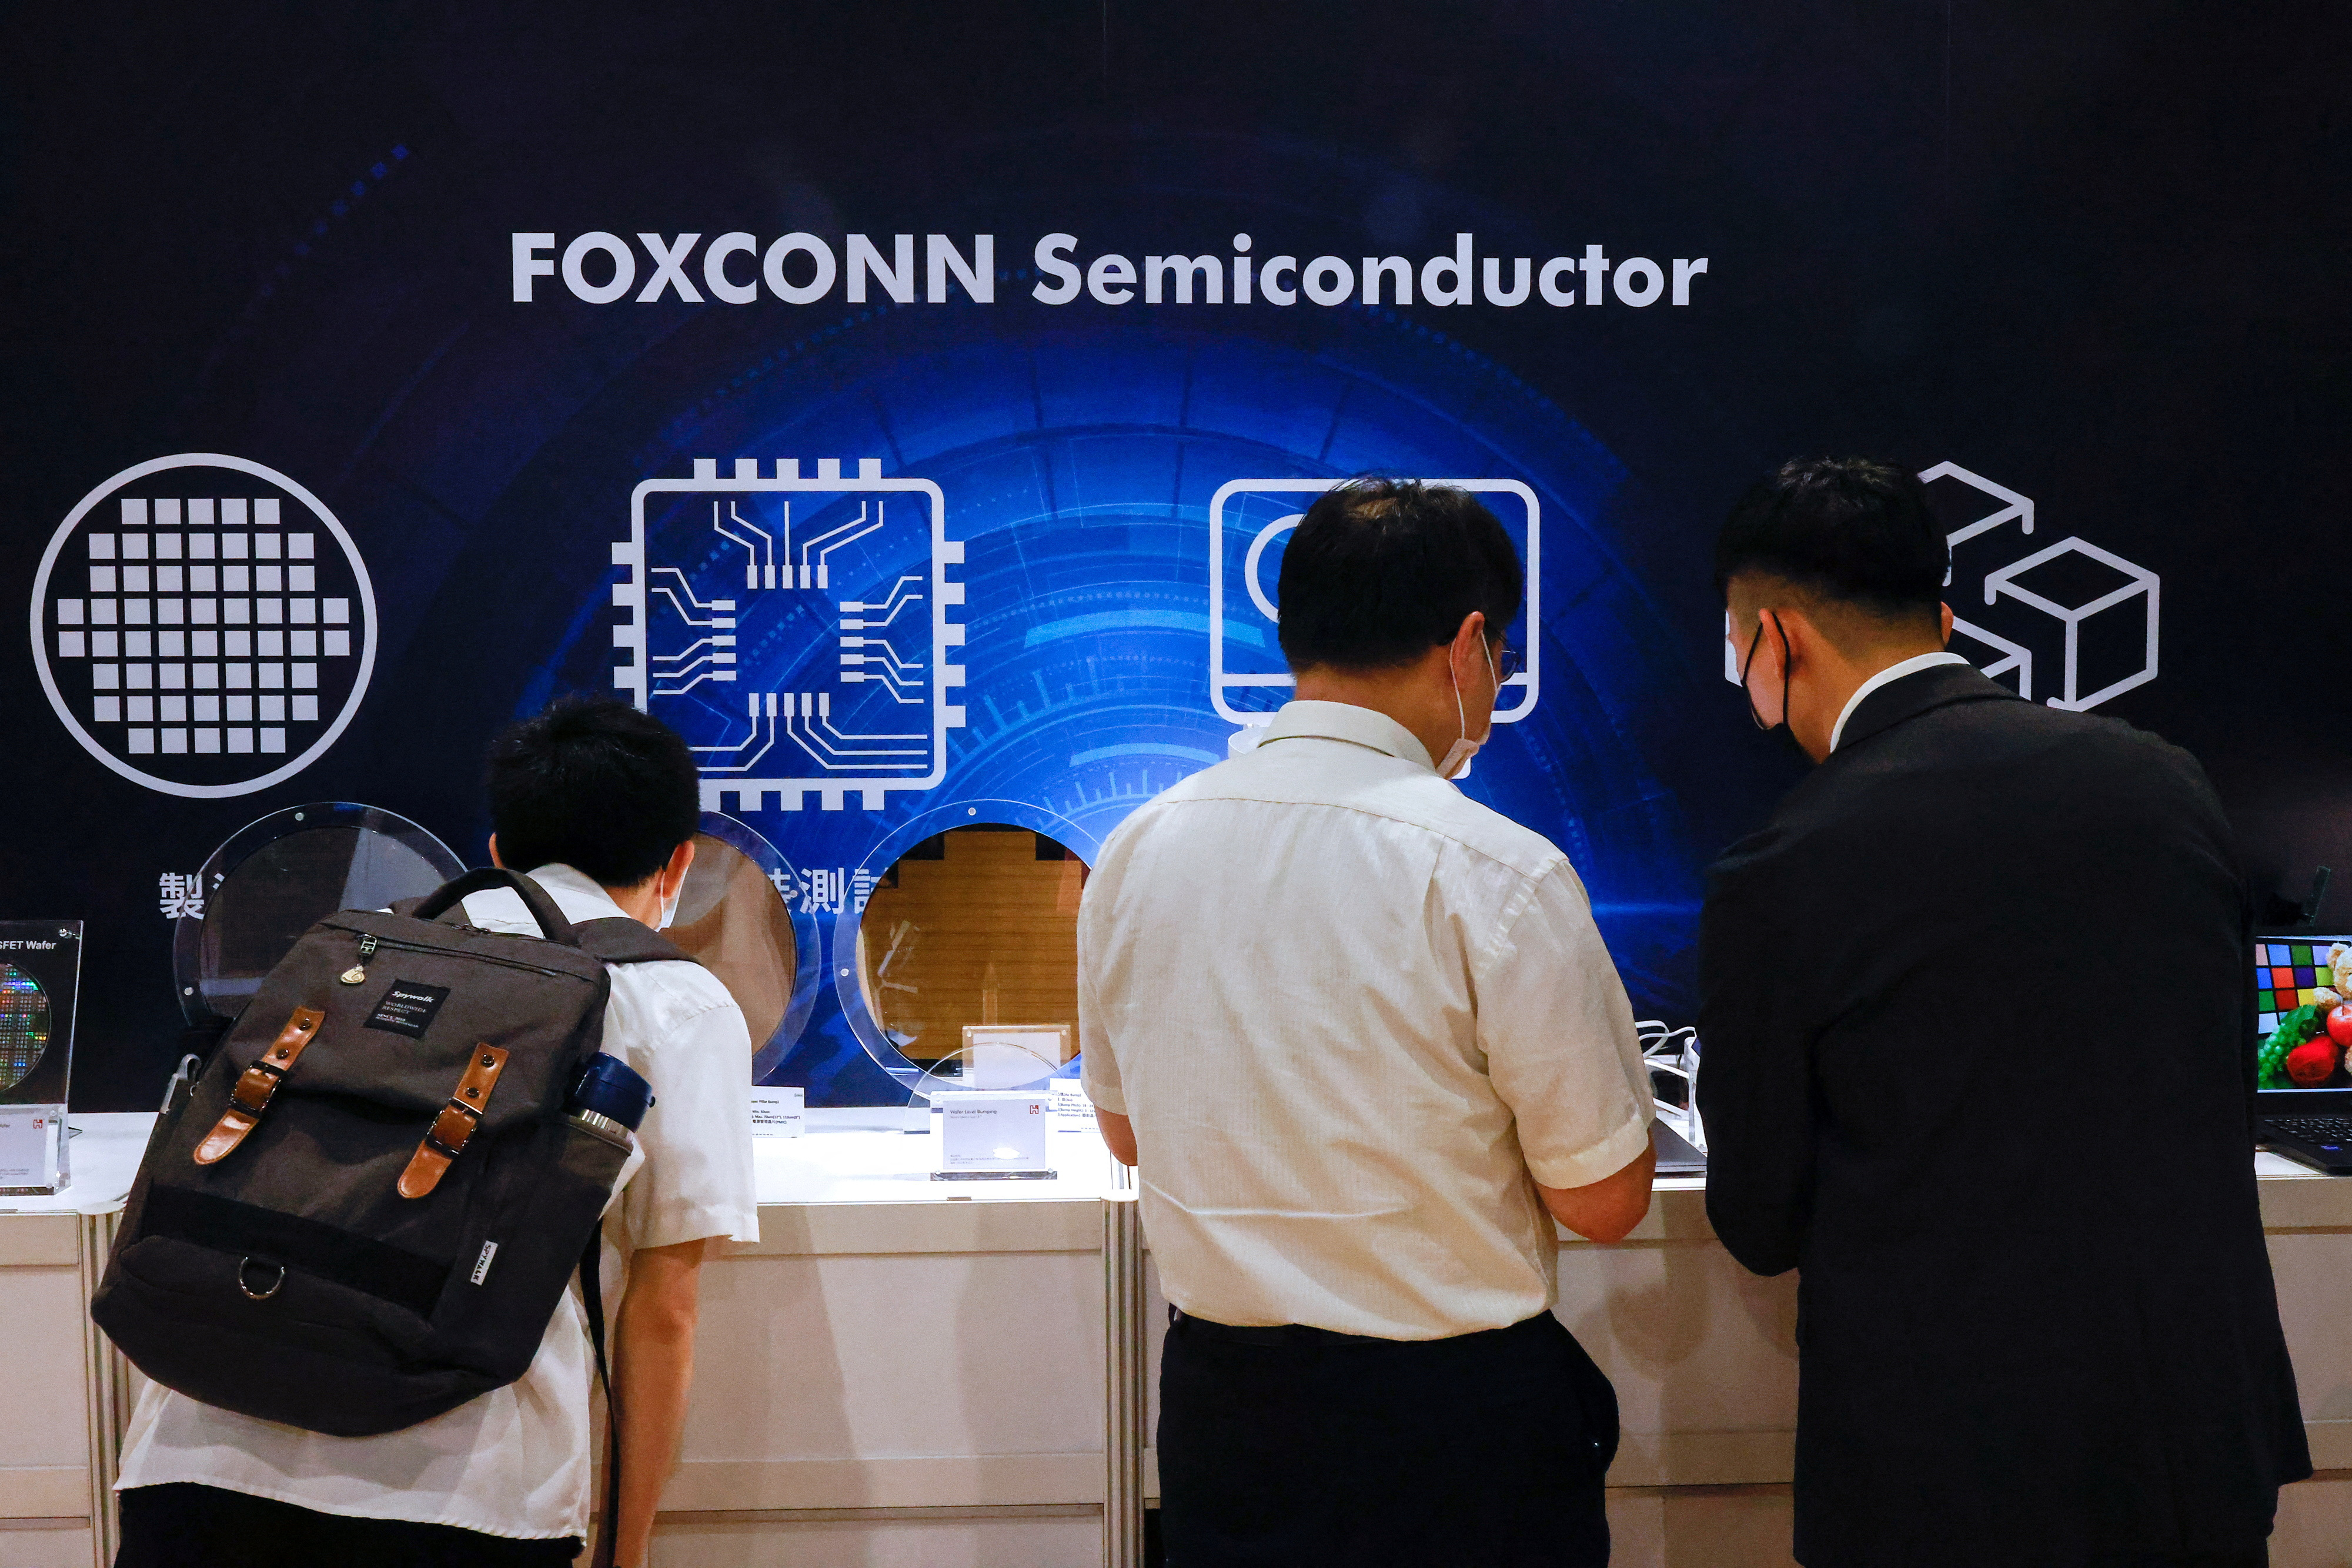 Foxconn shareholders look at wafers on display after the annual shareholder meeting in New Taipei City,